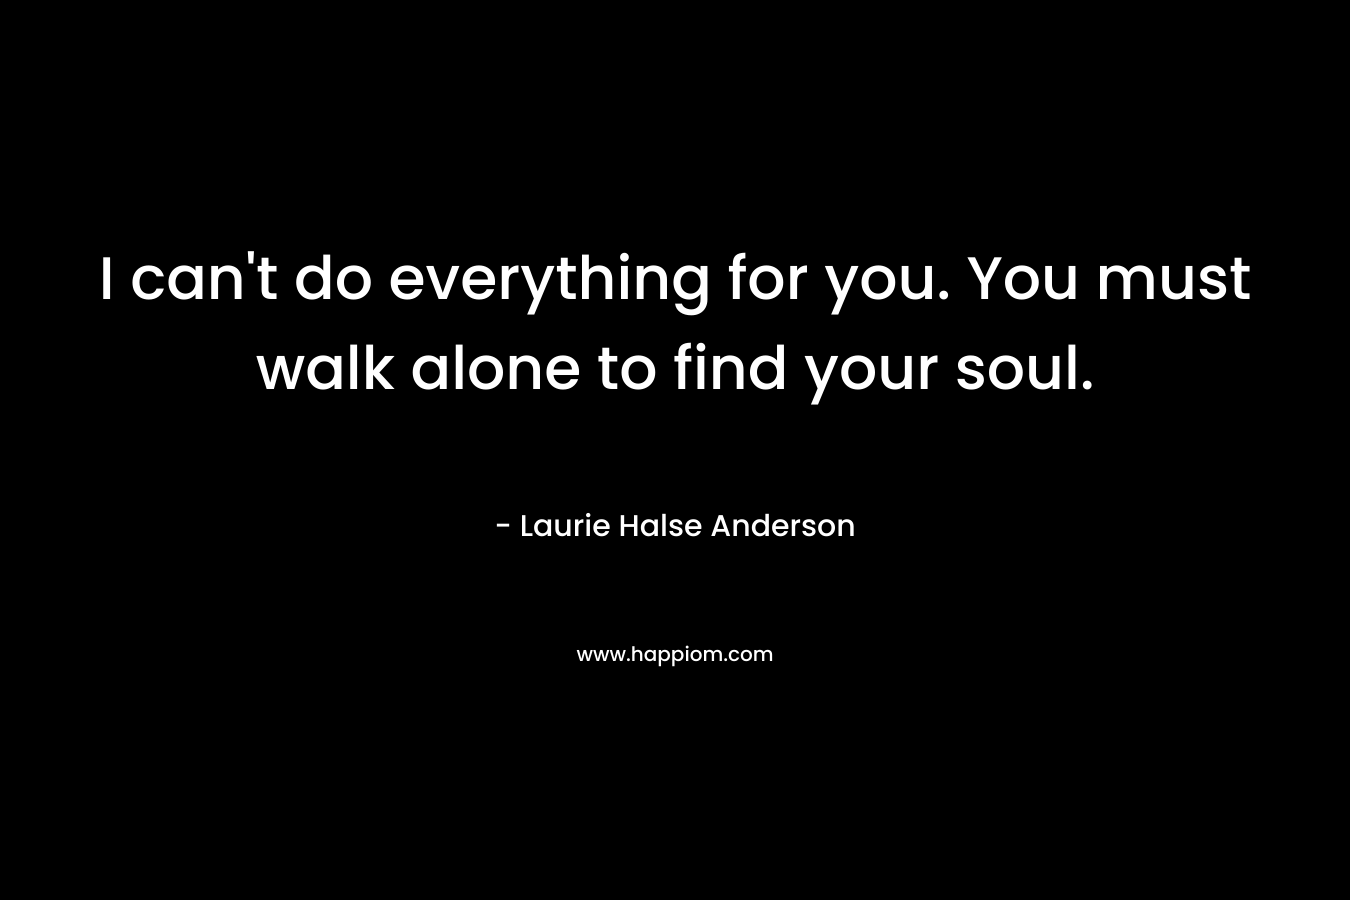 I can’t do everything for you. You must walk alone to find your soul. – Laurie Halse Anderson